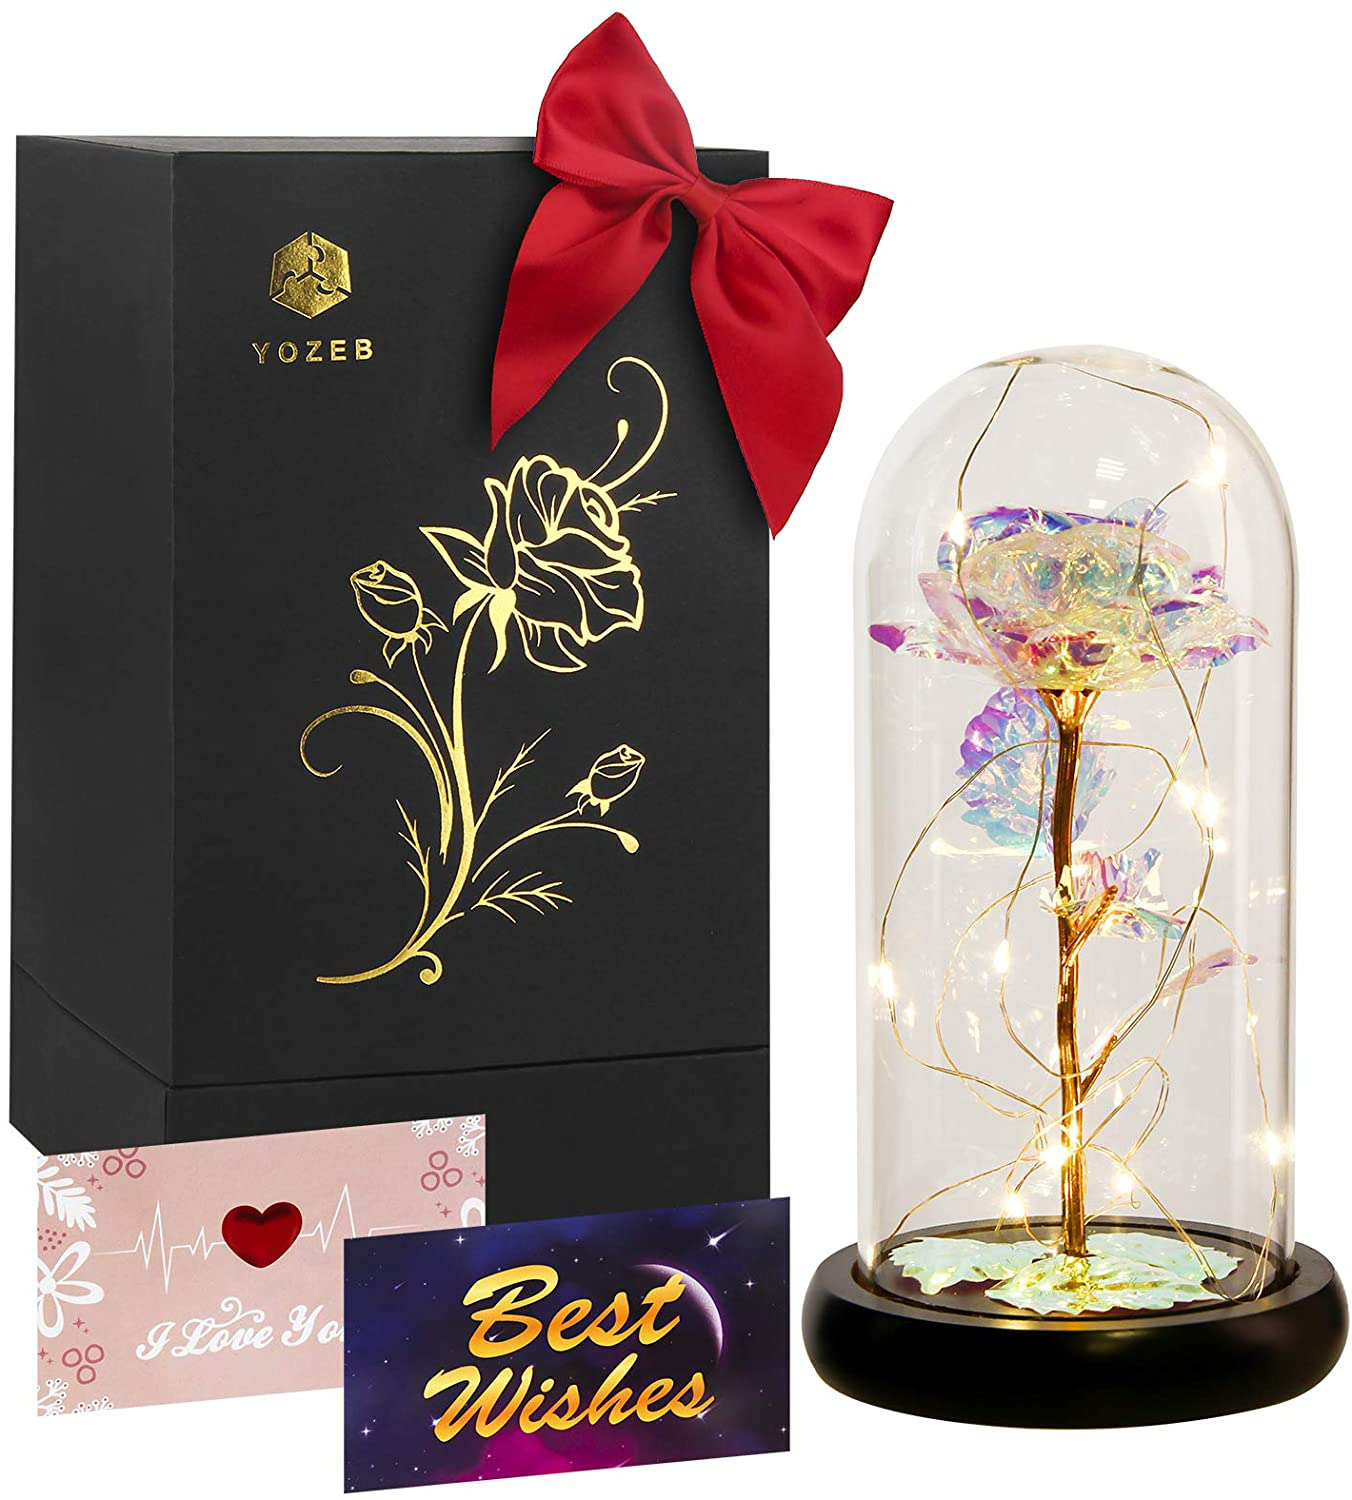 Beauty and the Beast Rose，Forever Rose, Enchanted Rose, Glass Dome Black Wood Ba